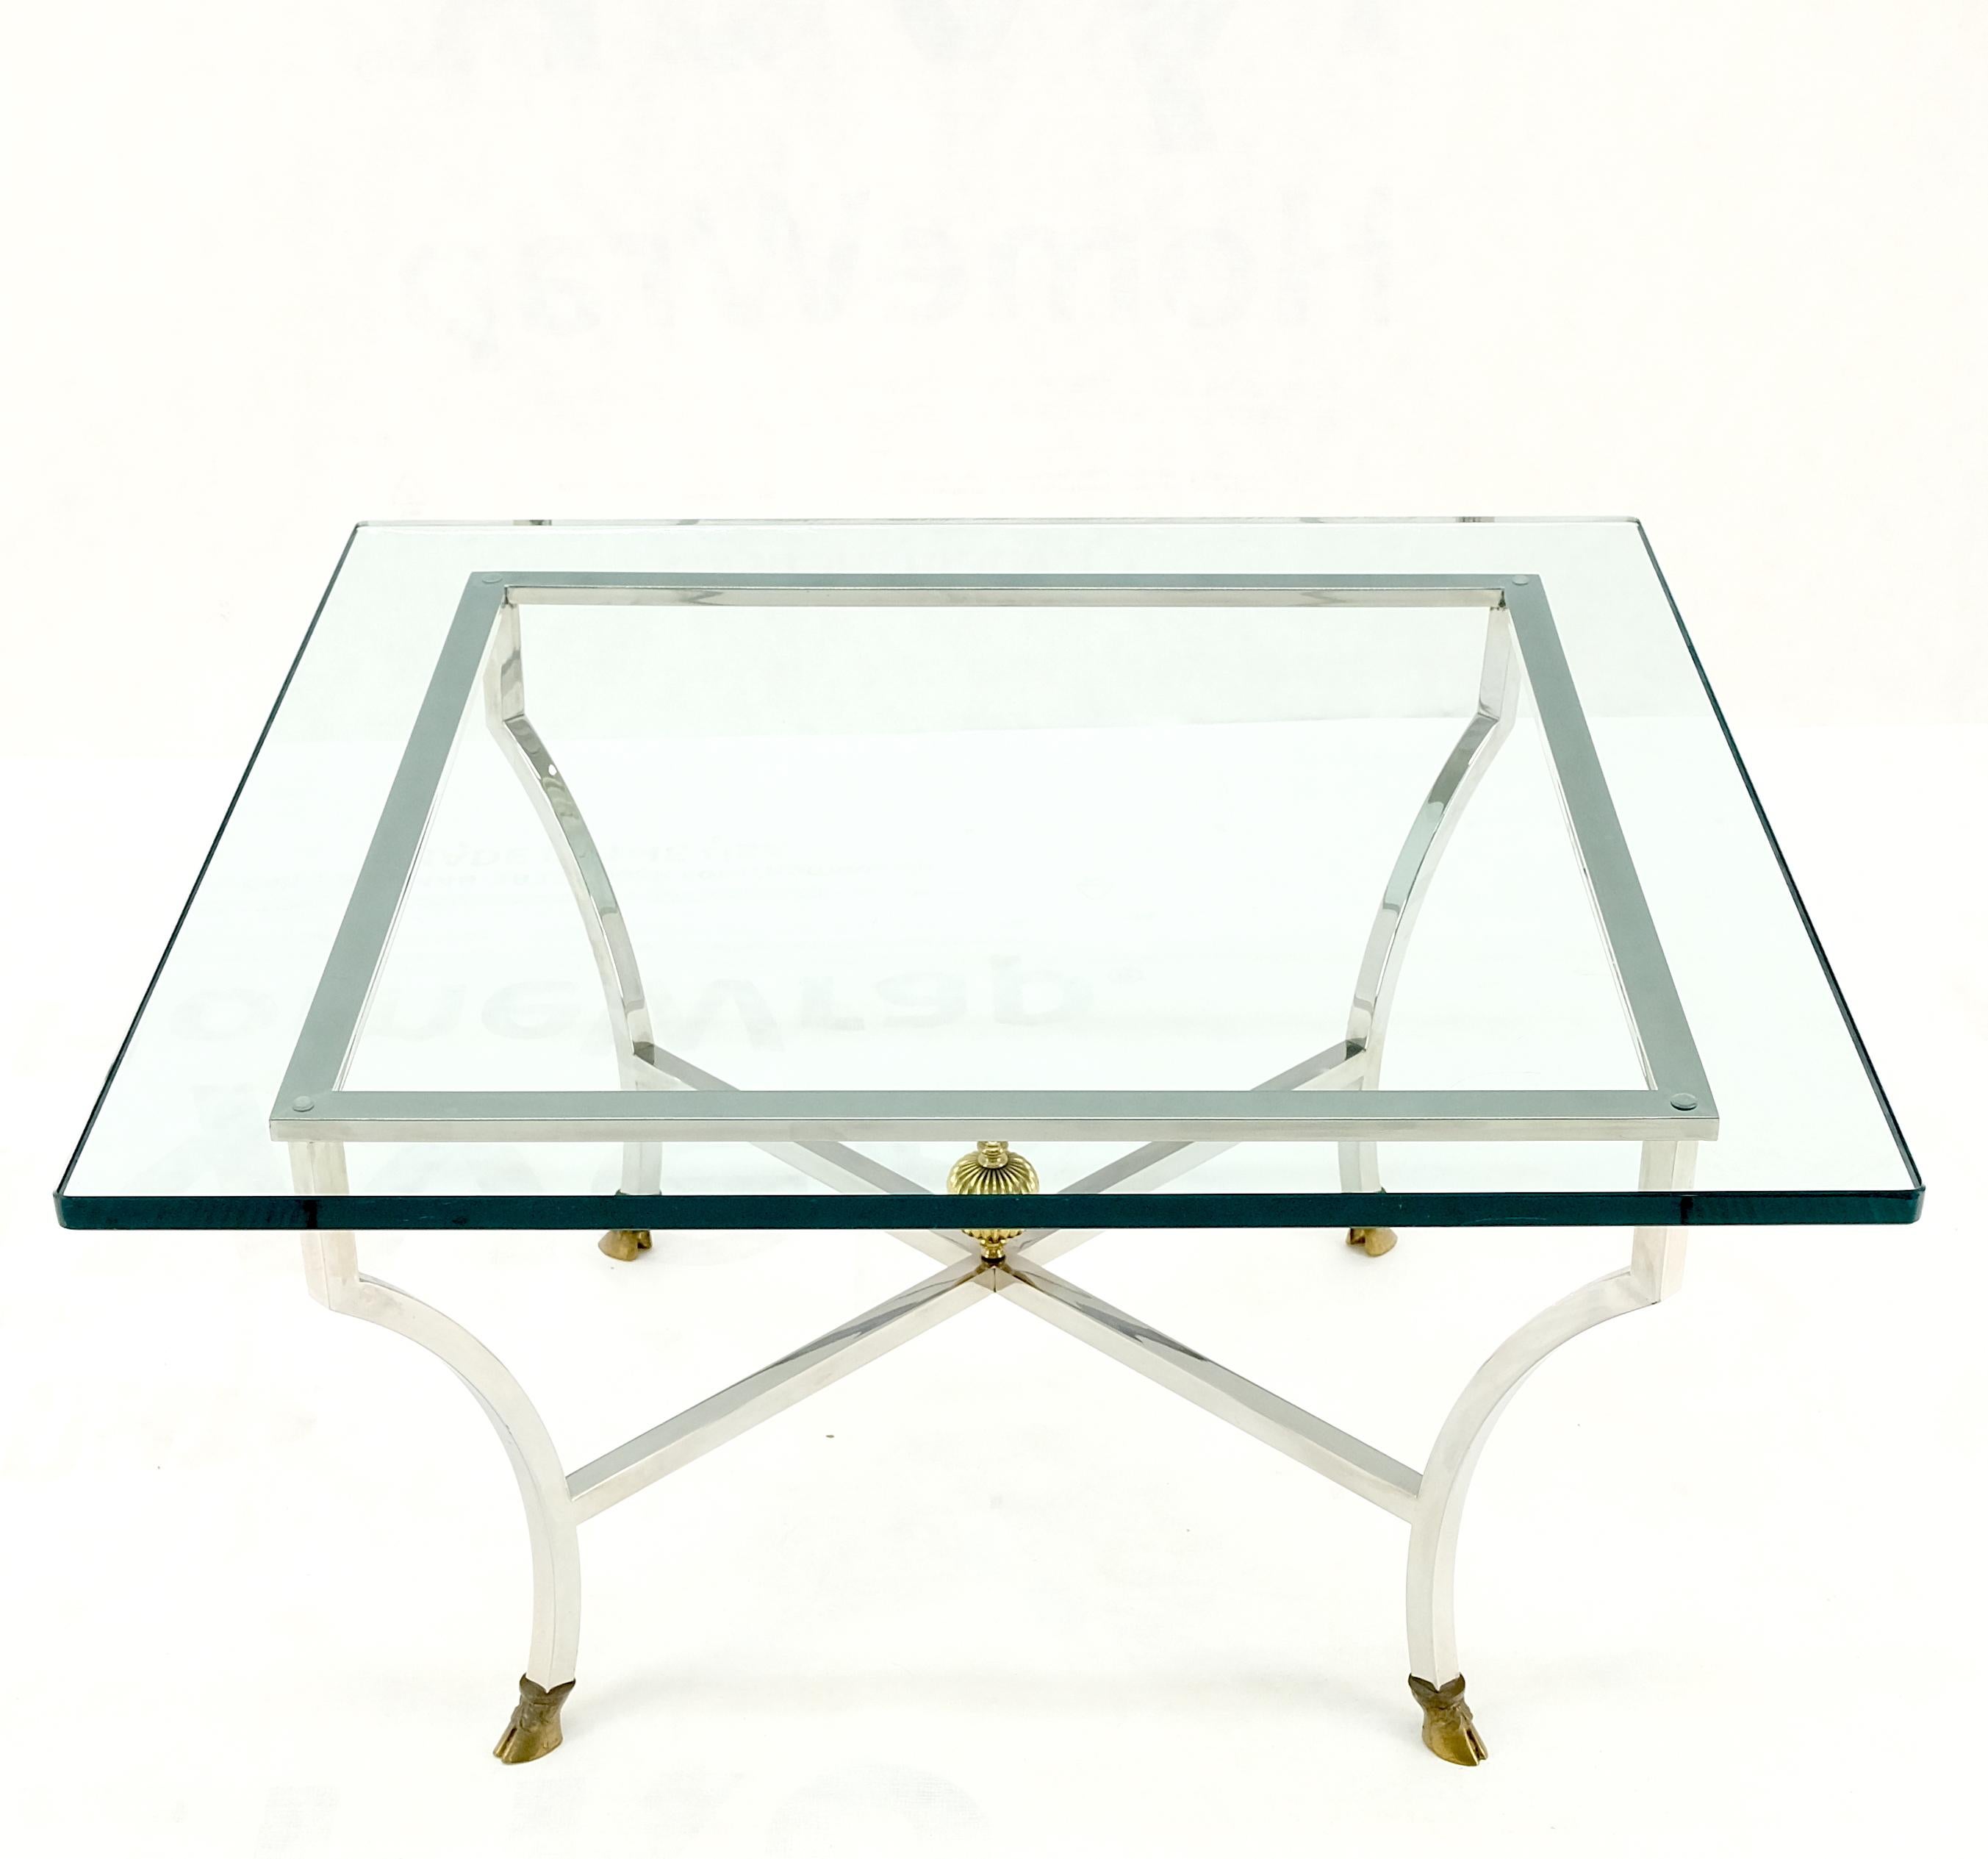 20th Century Chrome Glass Brass Finial Base Hoof Feet Square Coffee Center Table Mint! For Sale